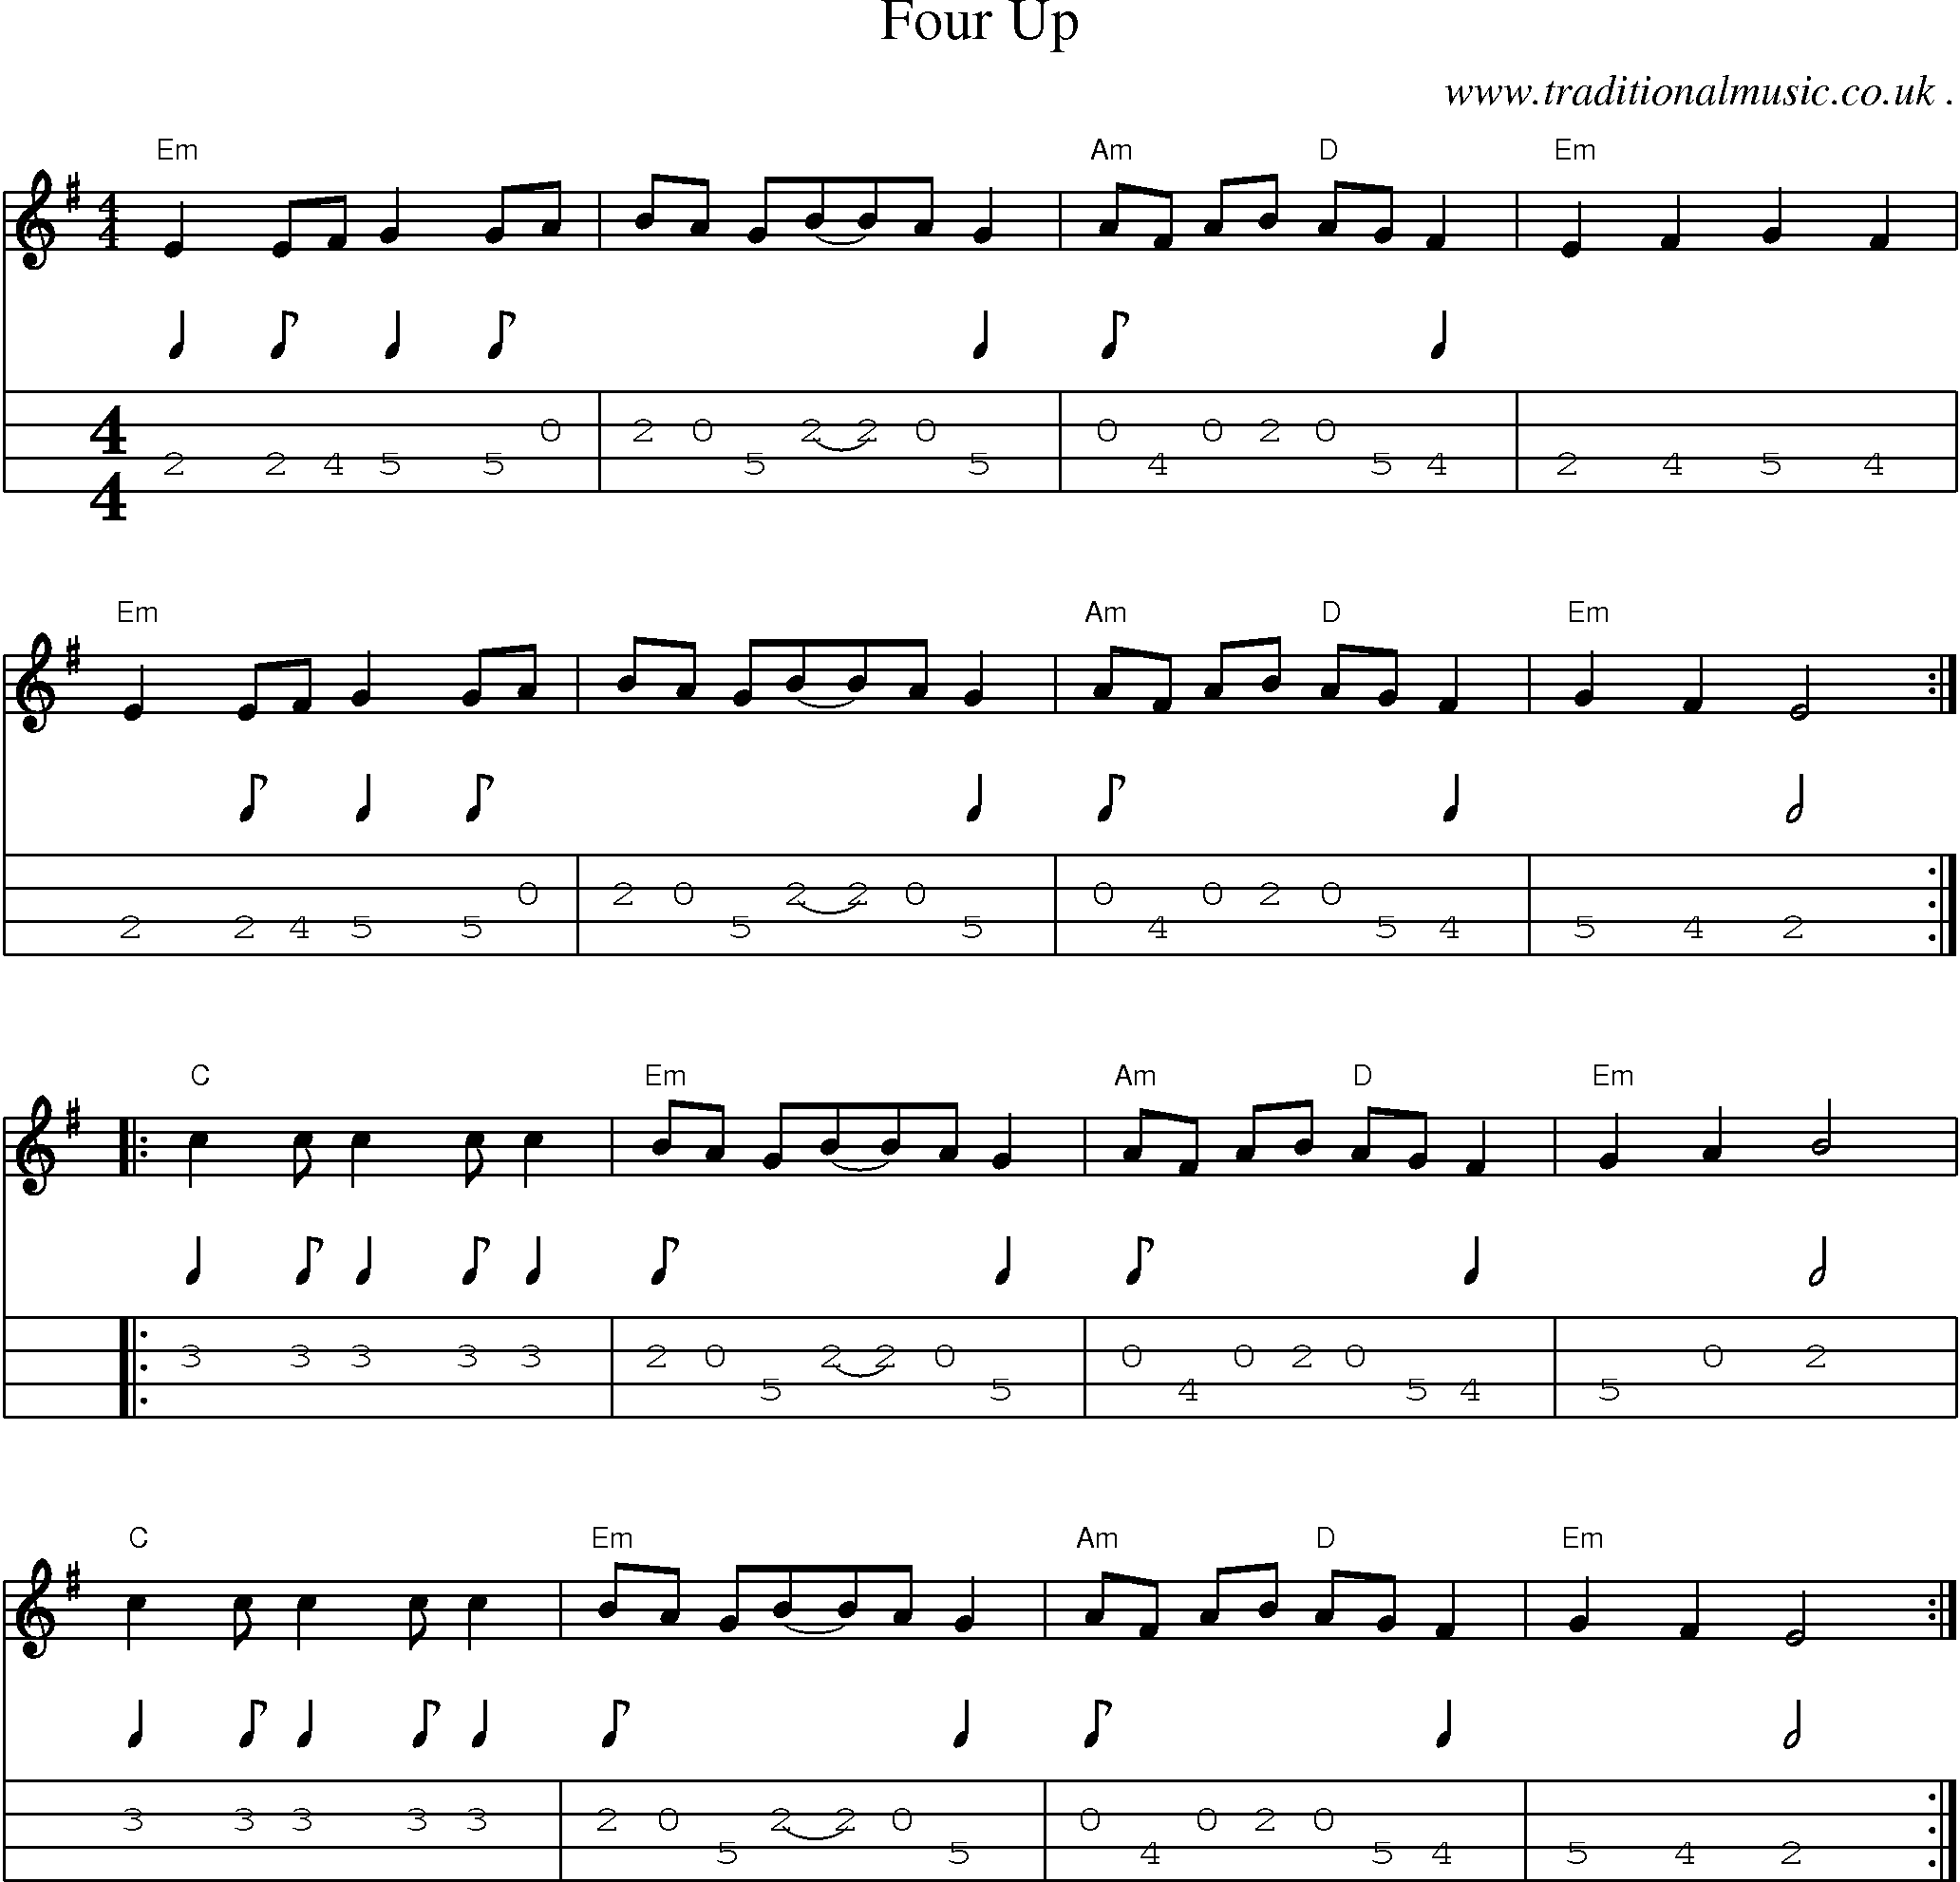 Music Score and Guitar Tabs for Four Up